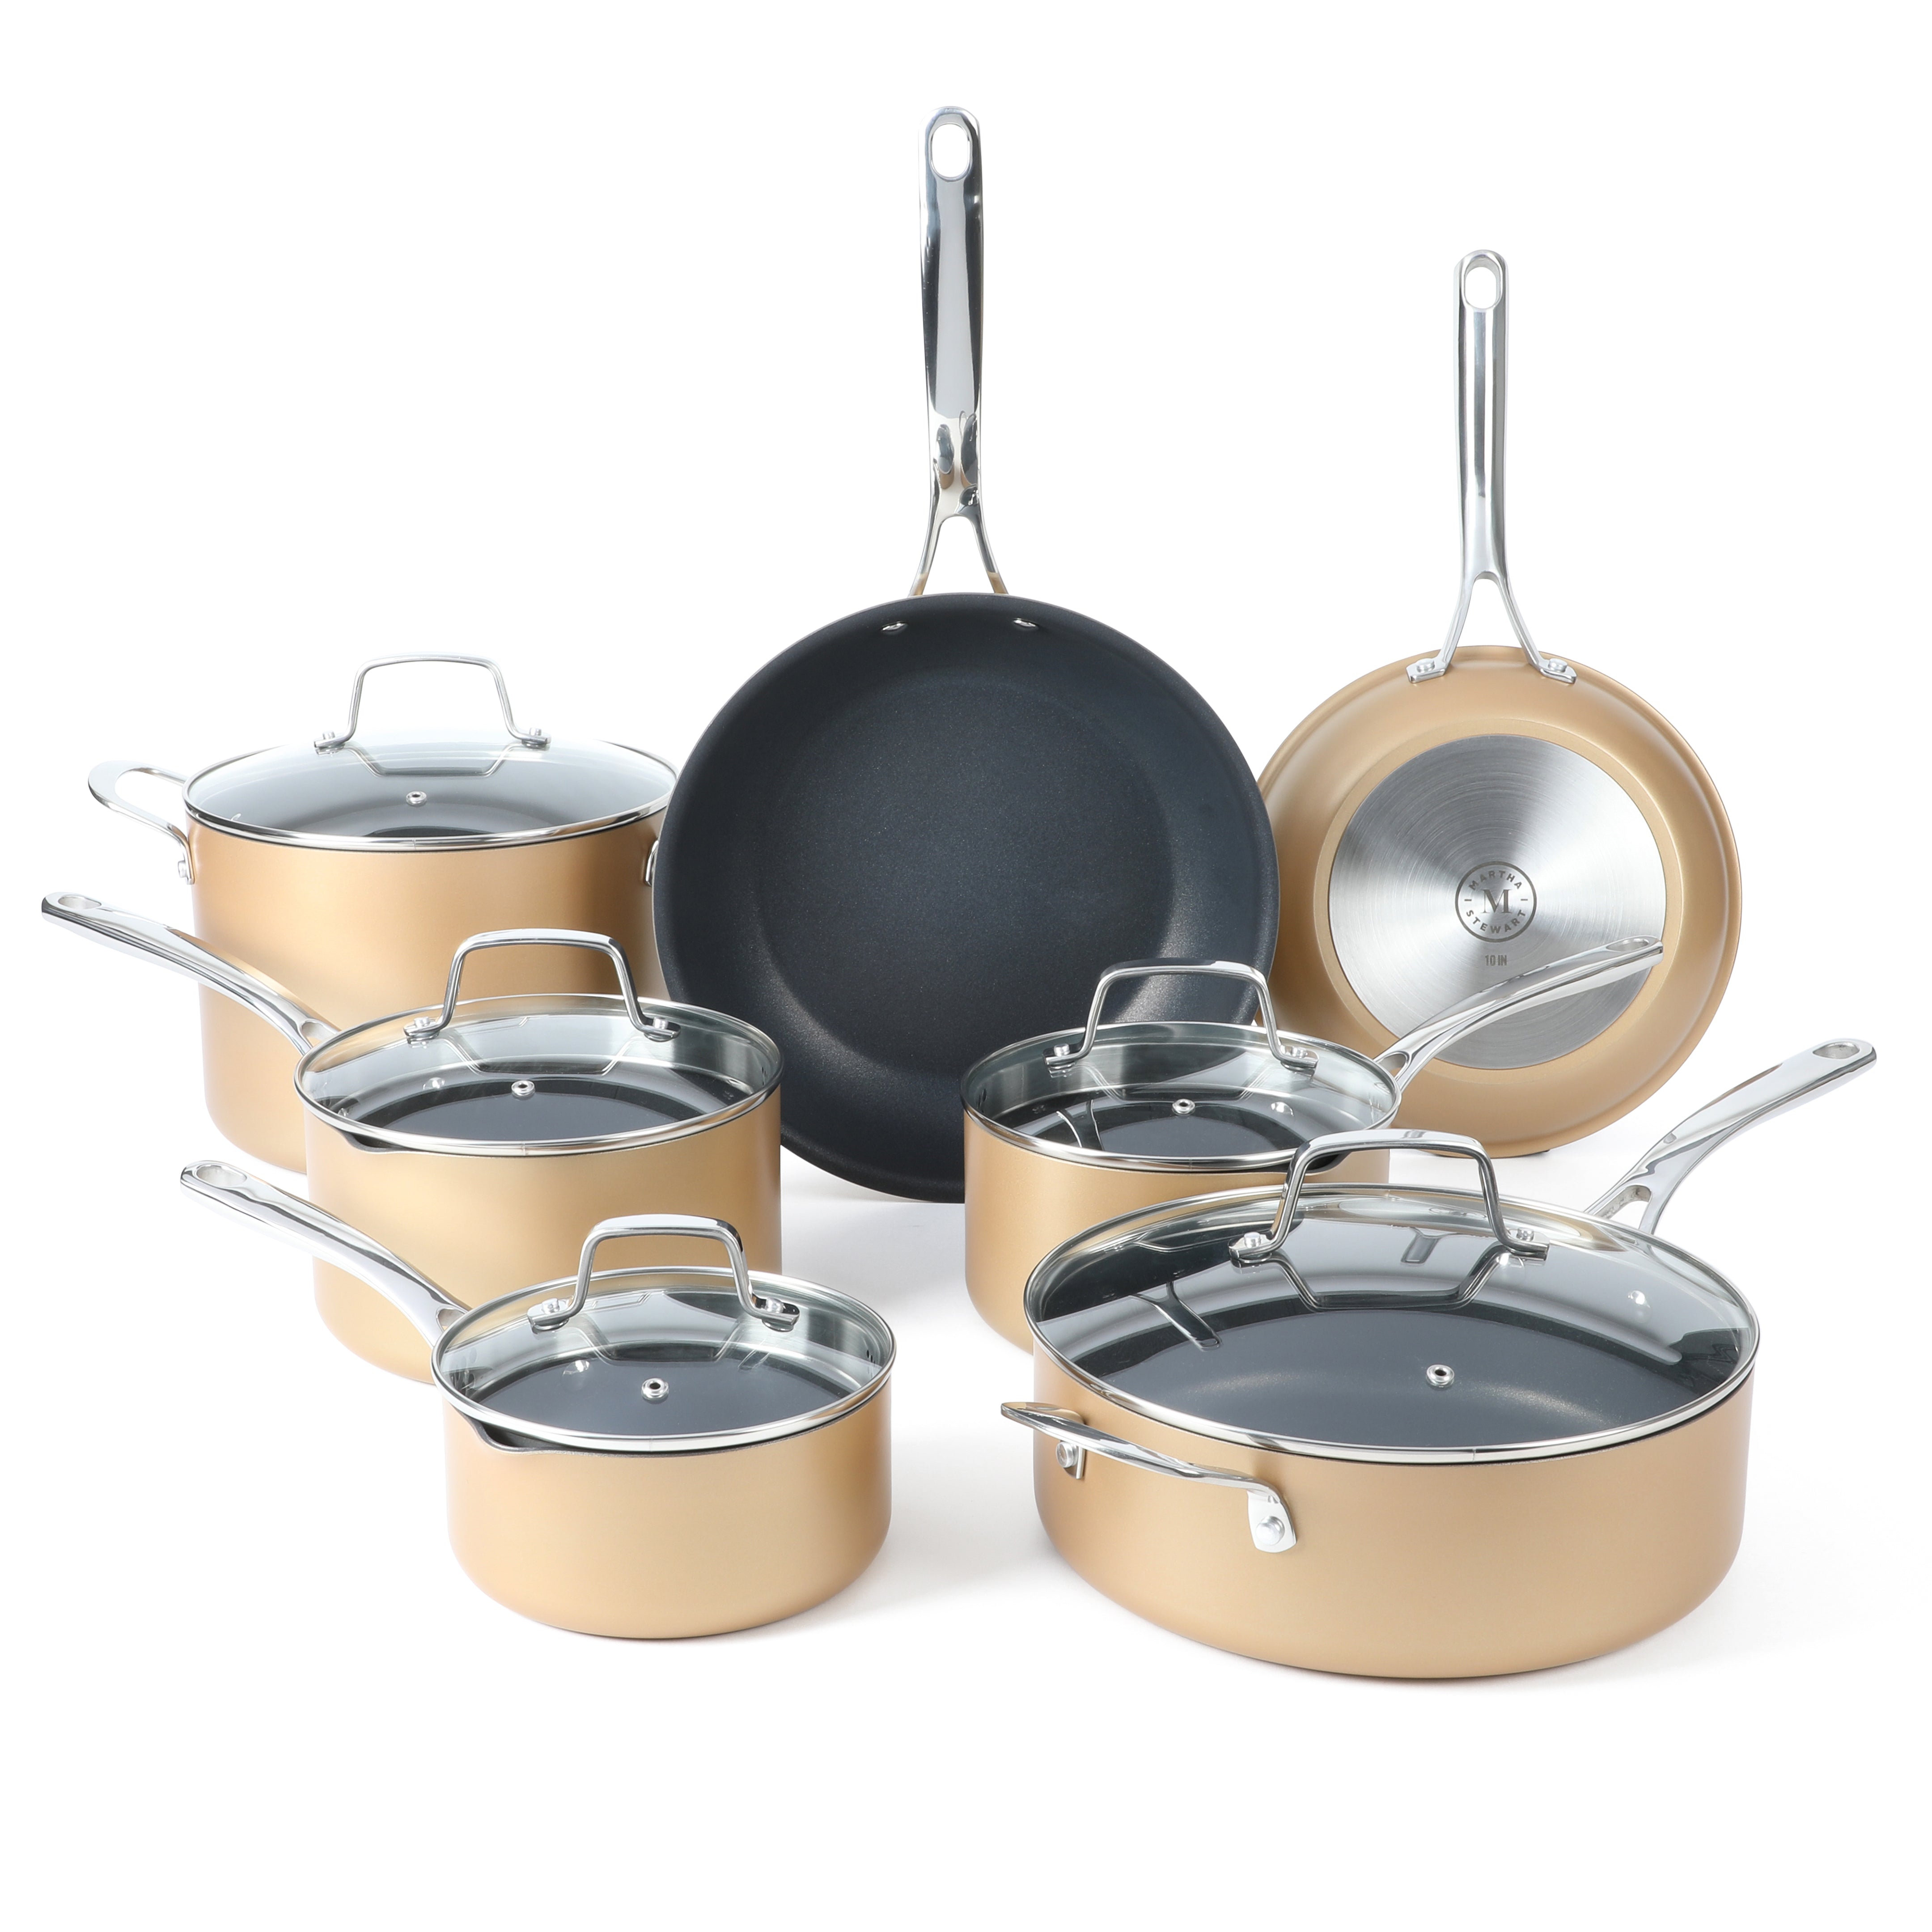 Cook N Home 12 Piece Nonstick Hard Anodized Cookware Set, Black